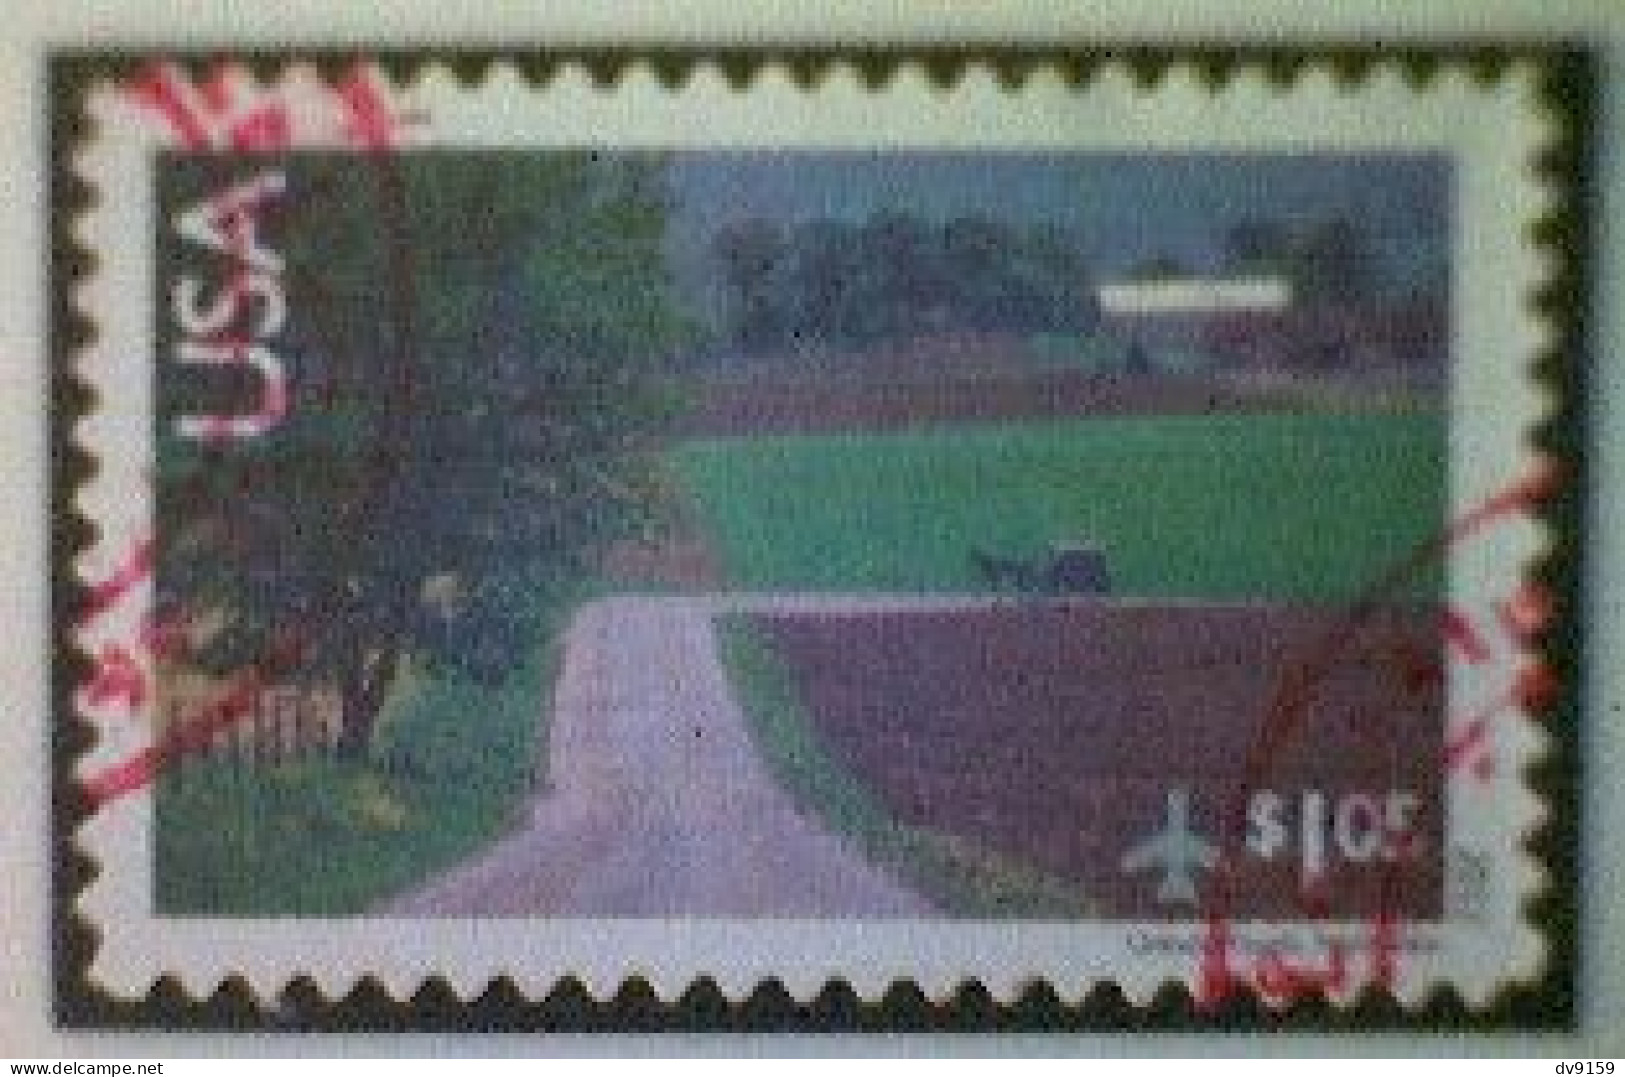 United States, Scott #C150, Used(o), 2012 Air Mail, Amish Horse And Buggy, $1.05, Multicolored - 3a. 1961-… Gebraucht